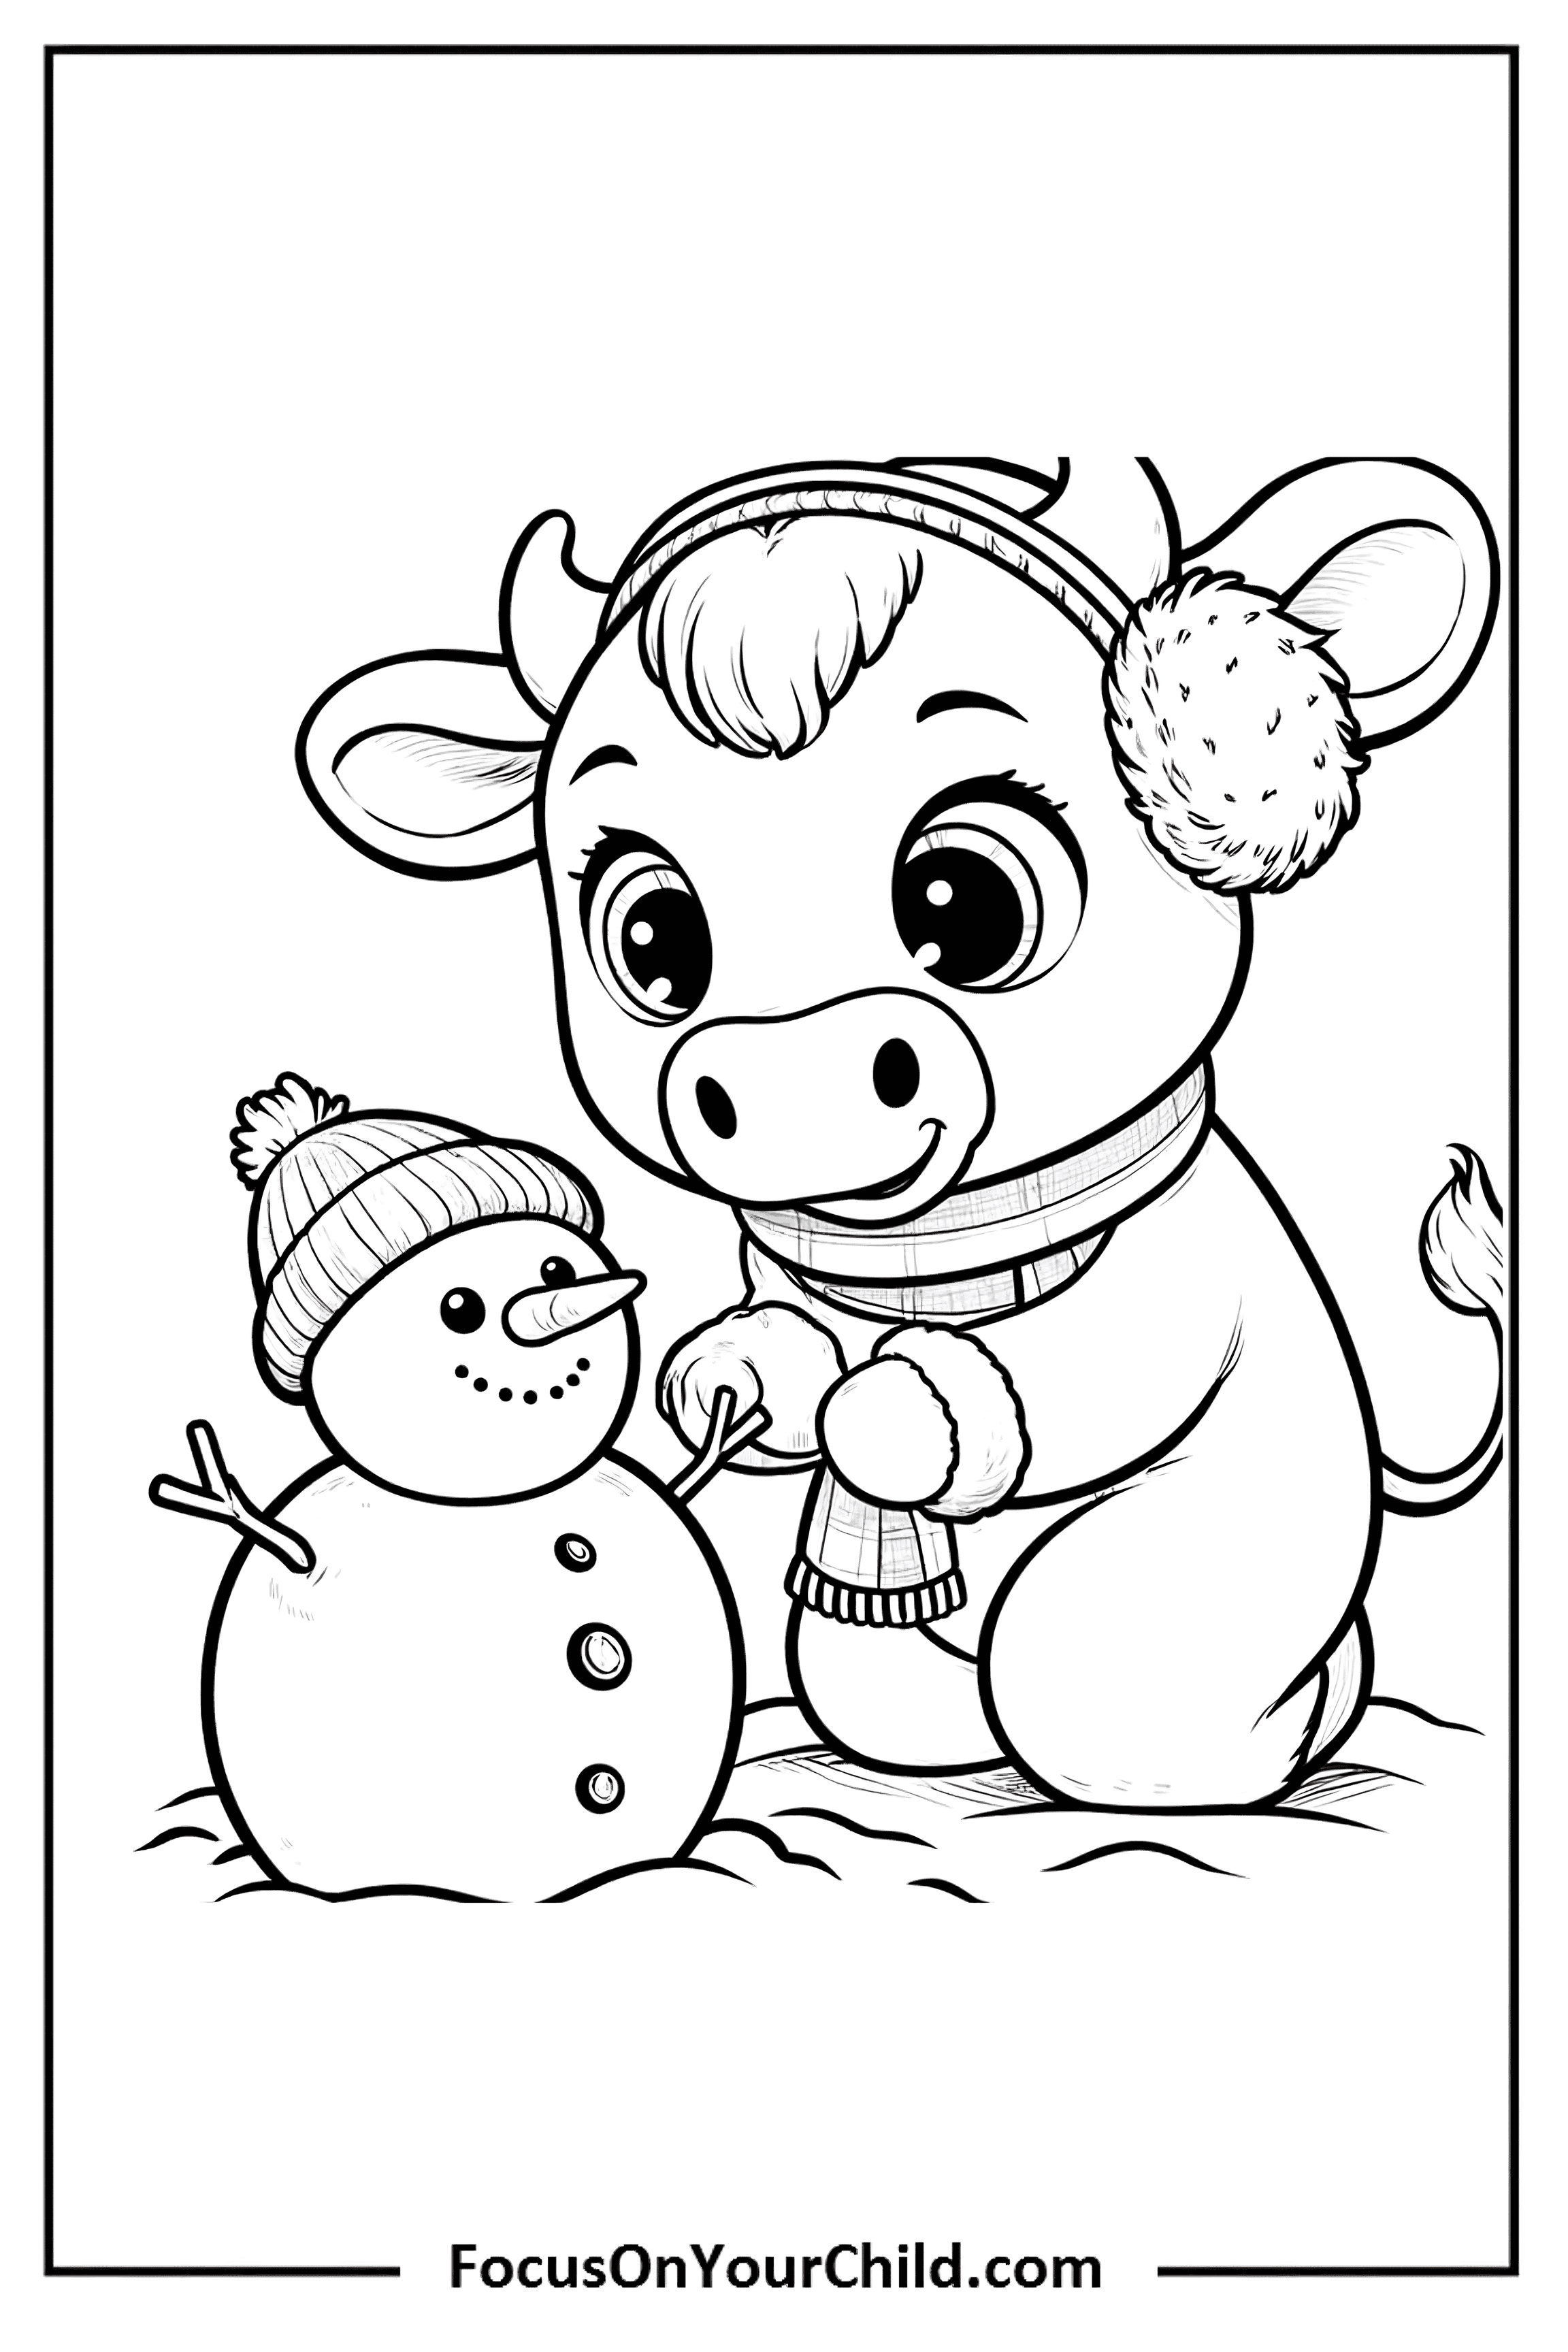 Charming winter scene with cow and snowman in snow.